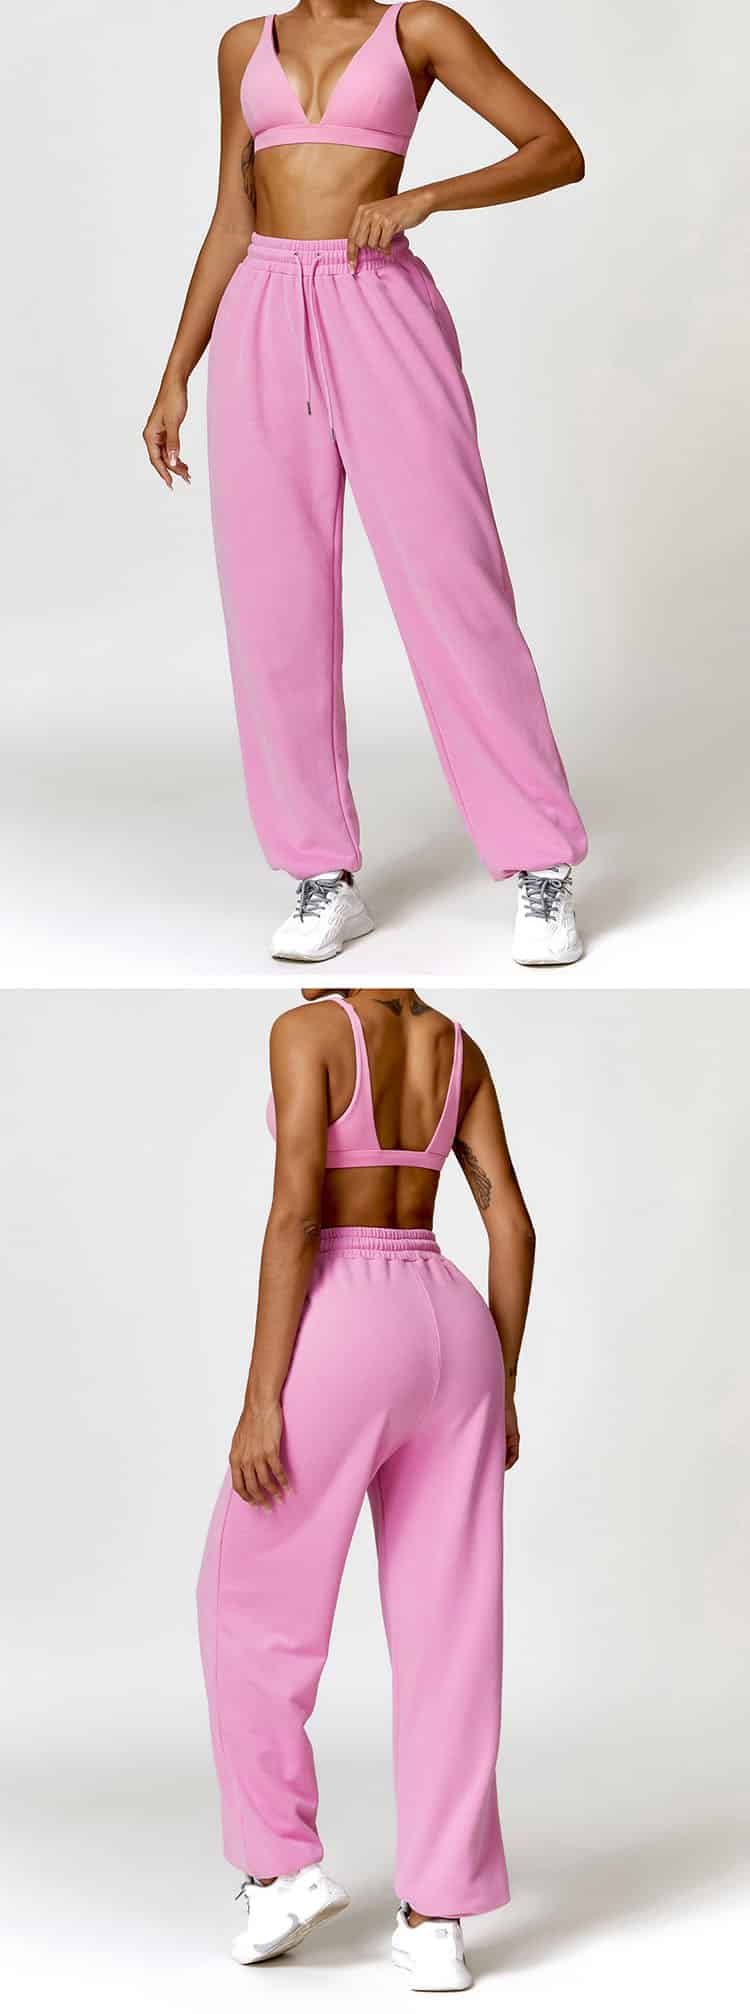 embrace these gym workout leggings from our innovative minds